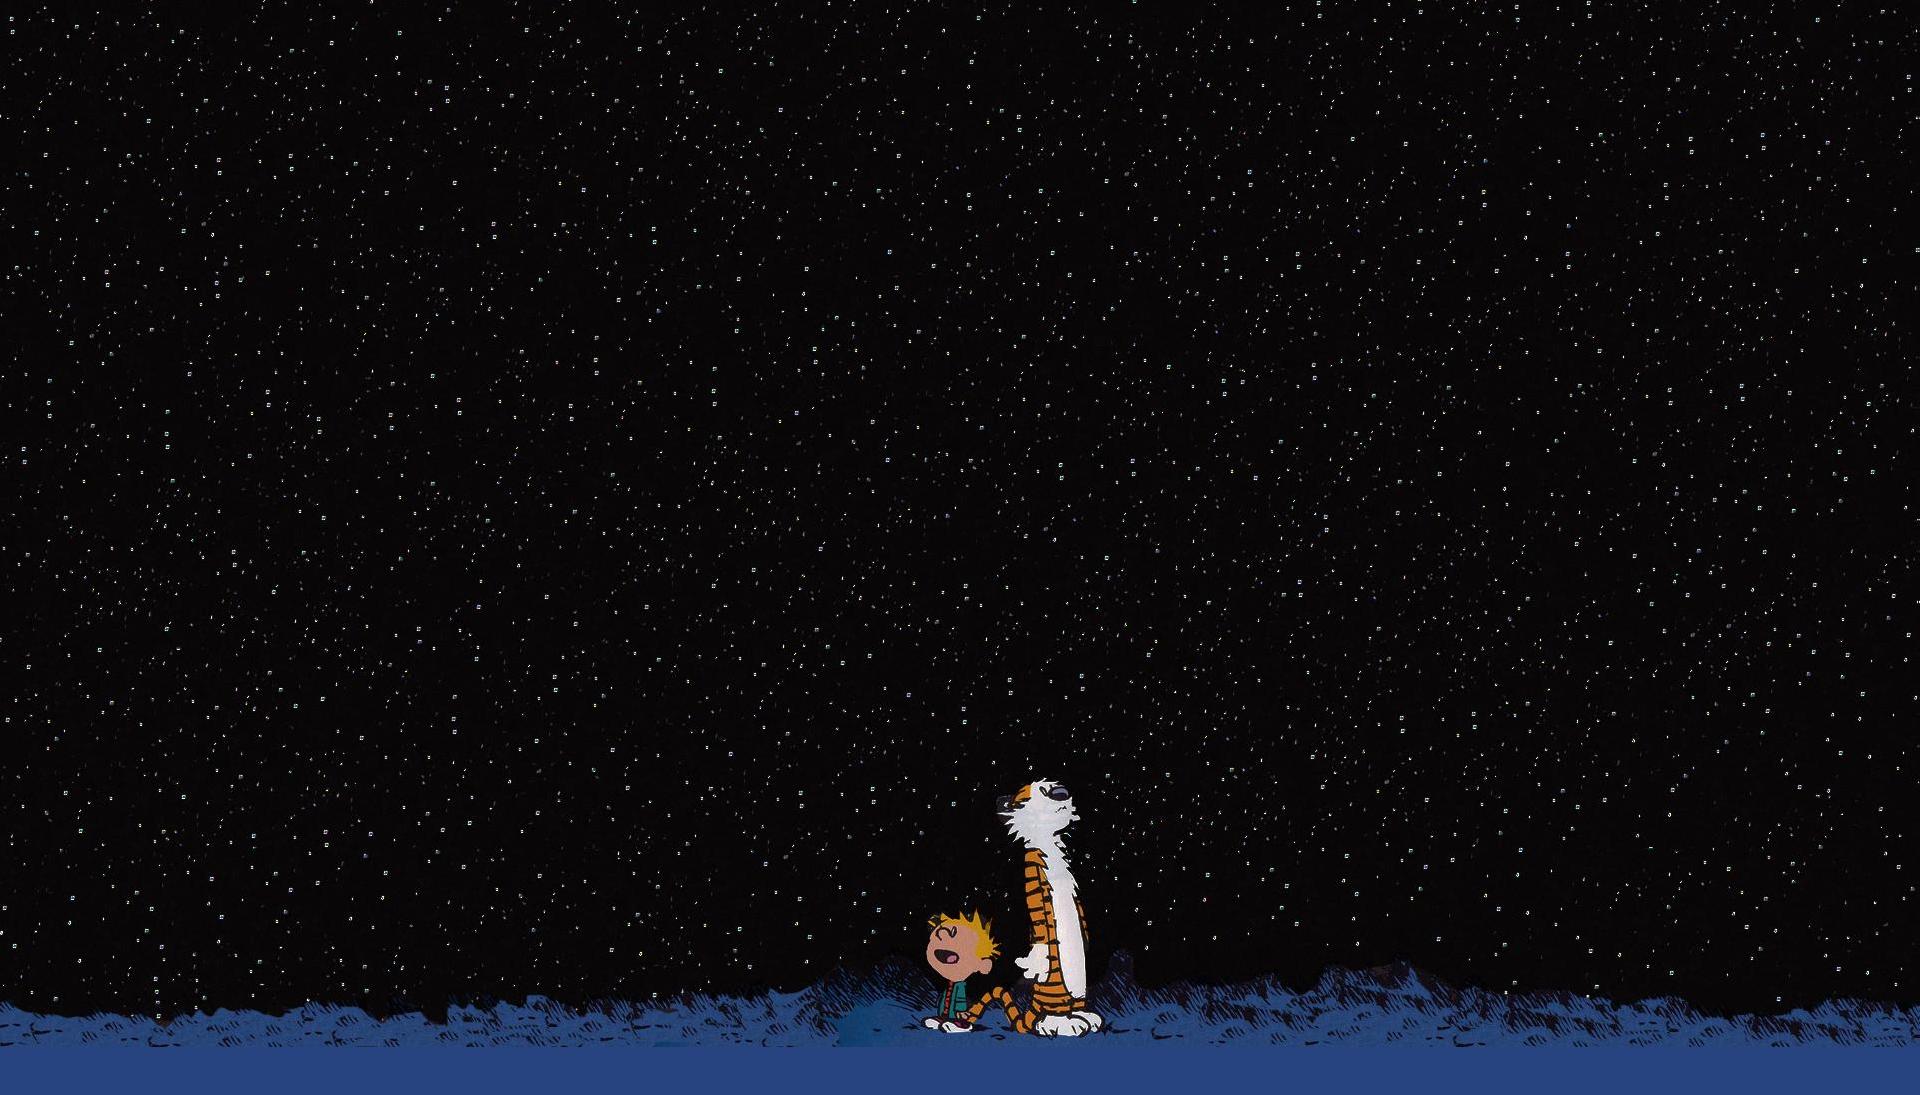 Calvin And Hobbes Wallpaper With Extra On The Bottom So They Sit Above